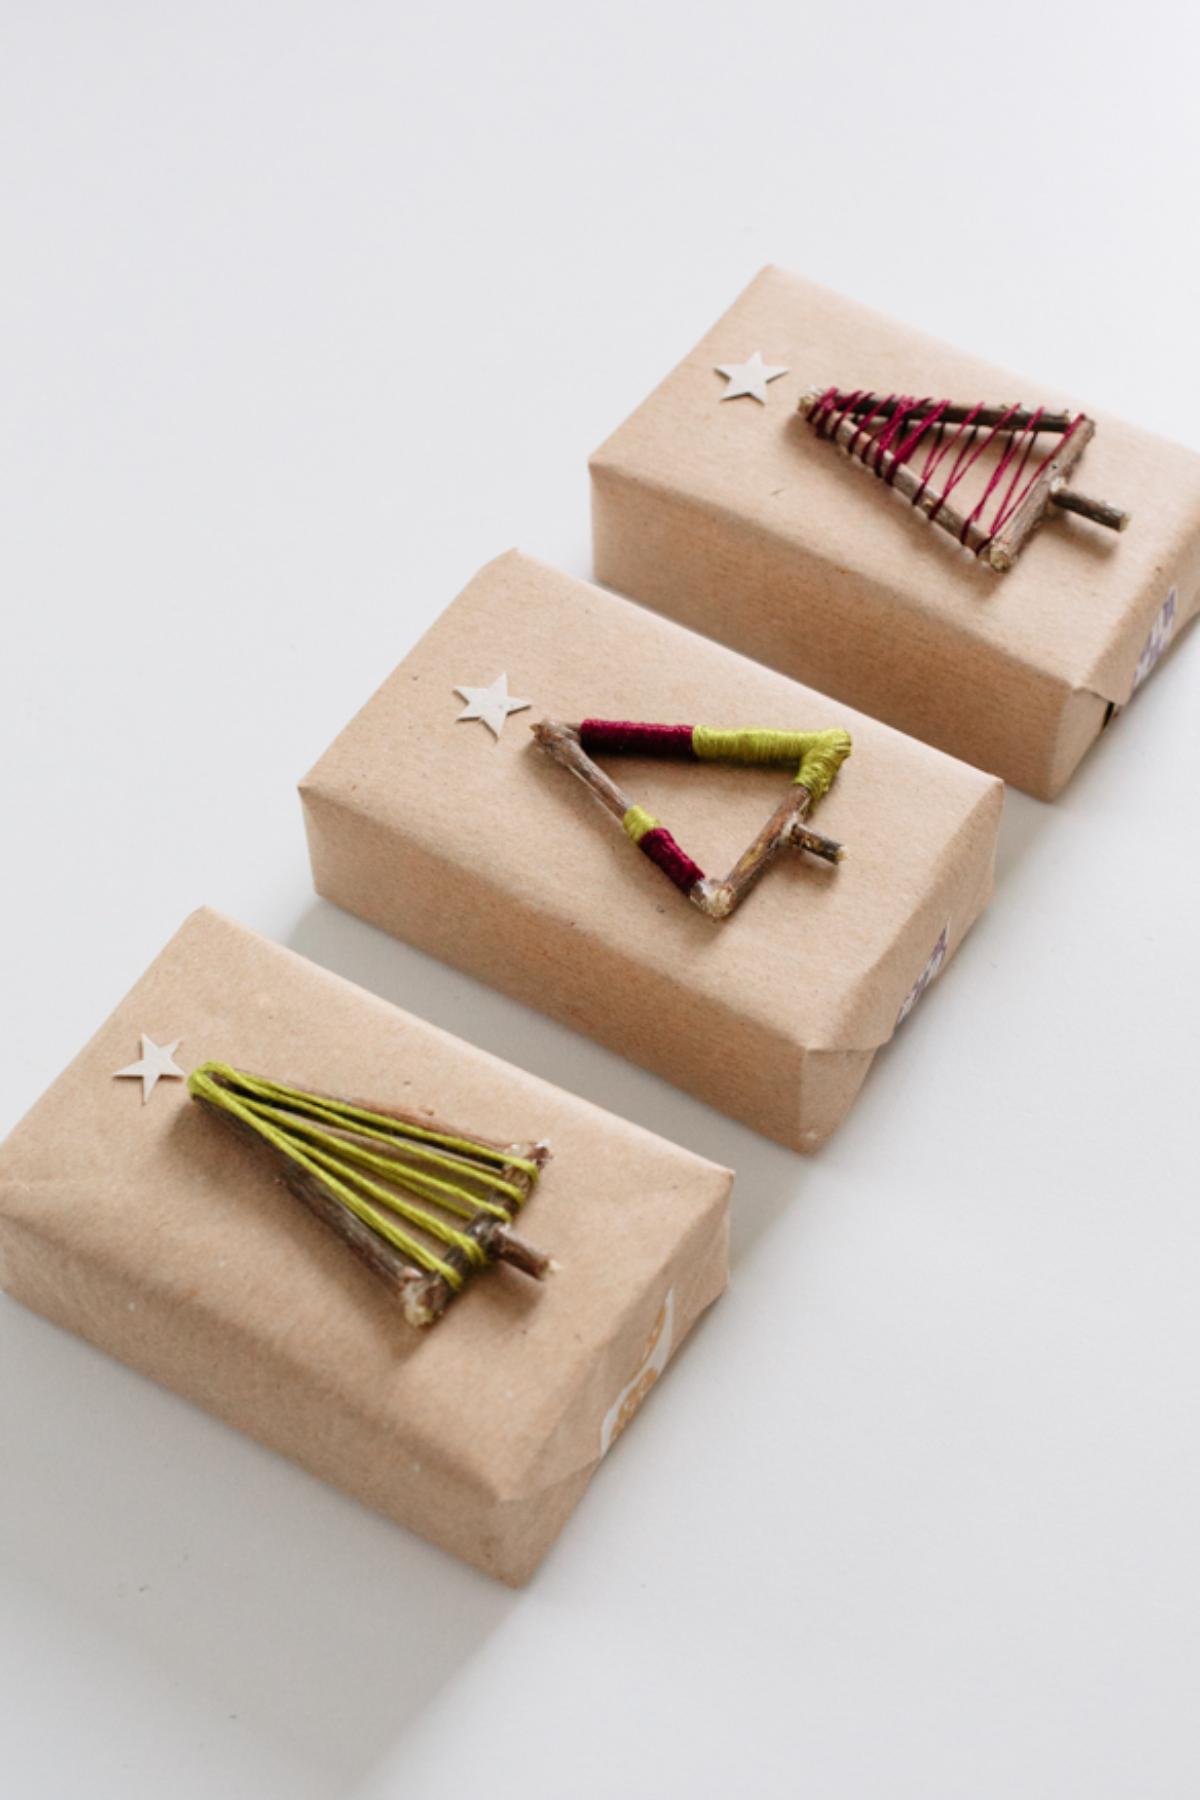 DIY Wood and string “rustic” Christmas trees gift wrappings.